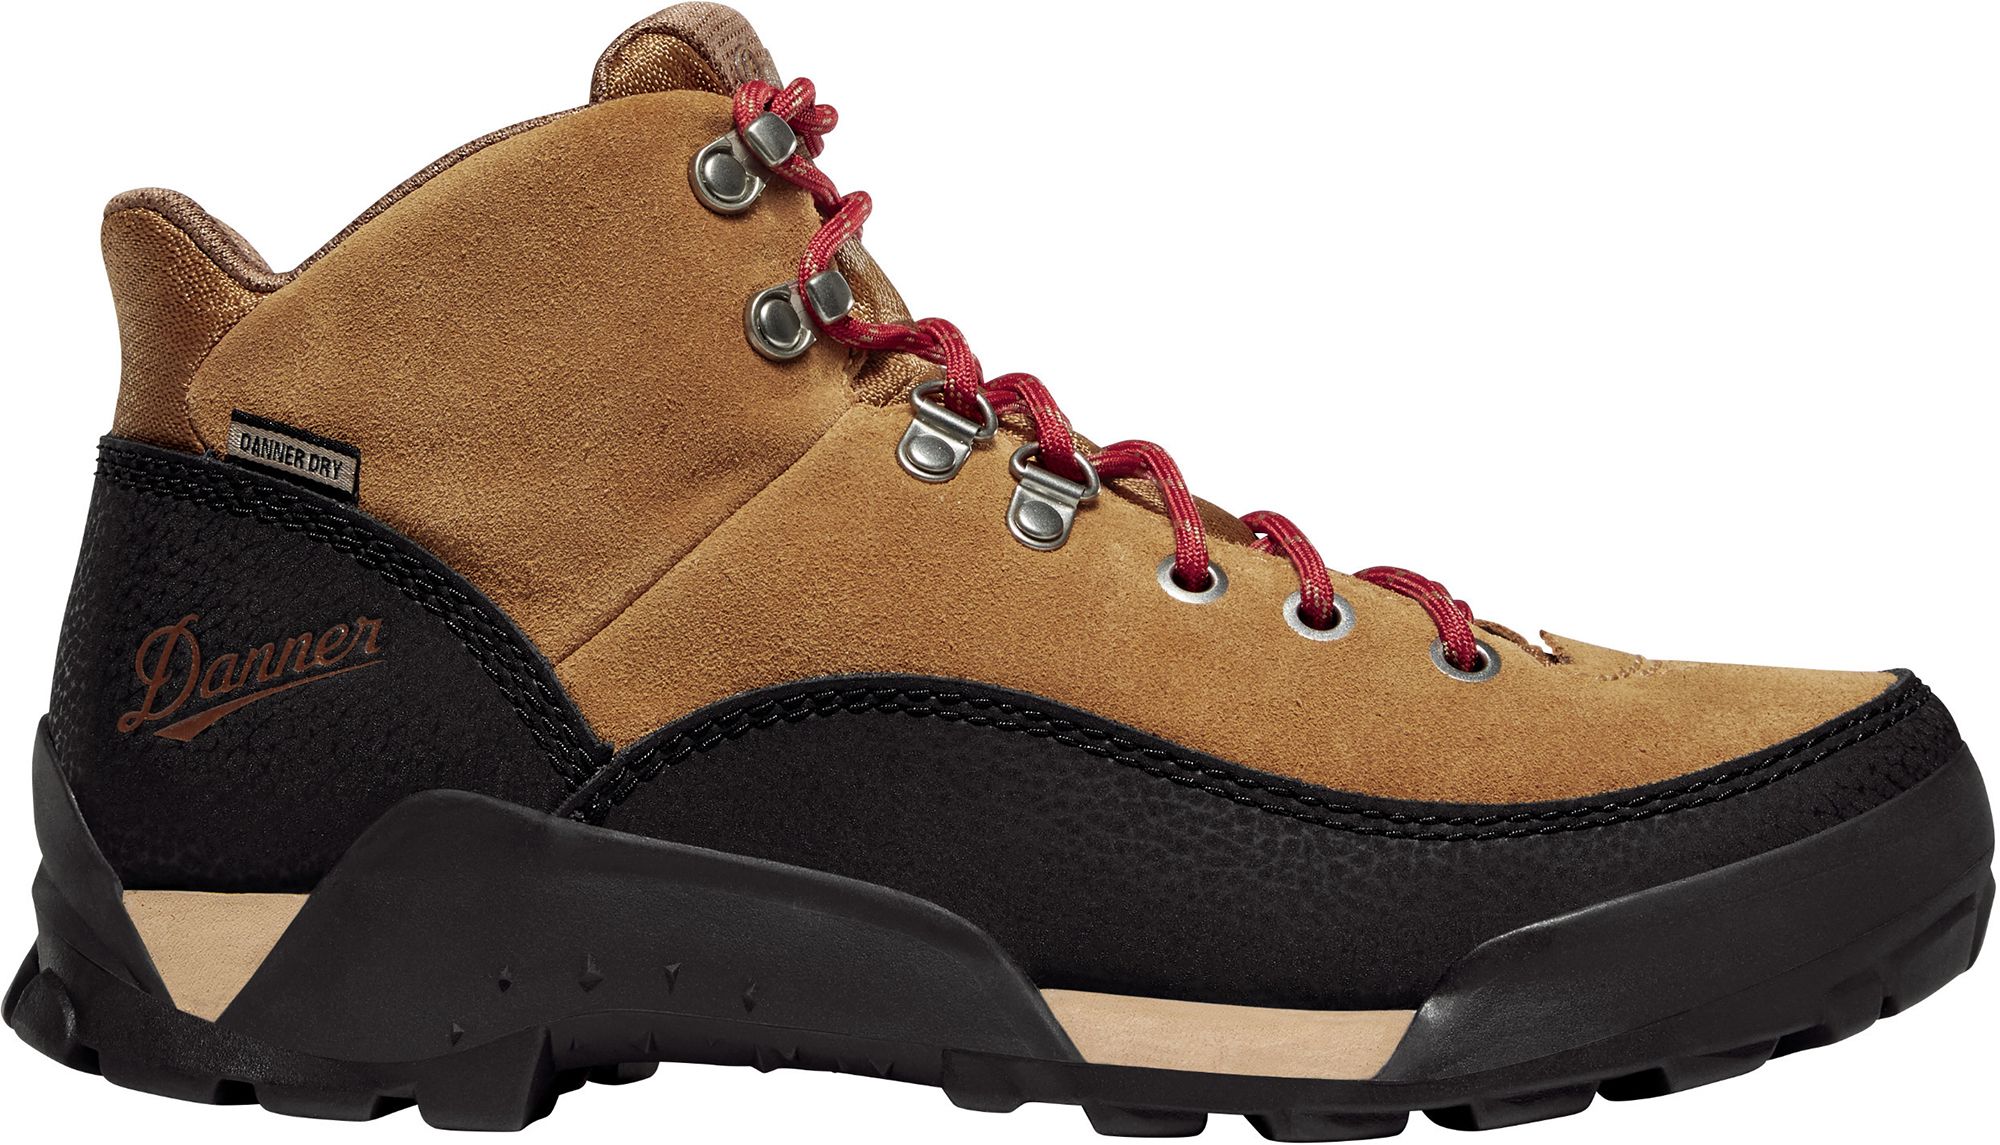 Photos - Trekking Shoes Danner Women's Panorama 6" Waterproof Hiking Boots, Size 9.5, Brown/Red 22 